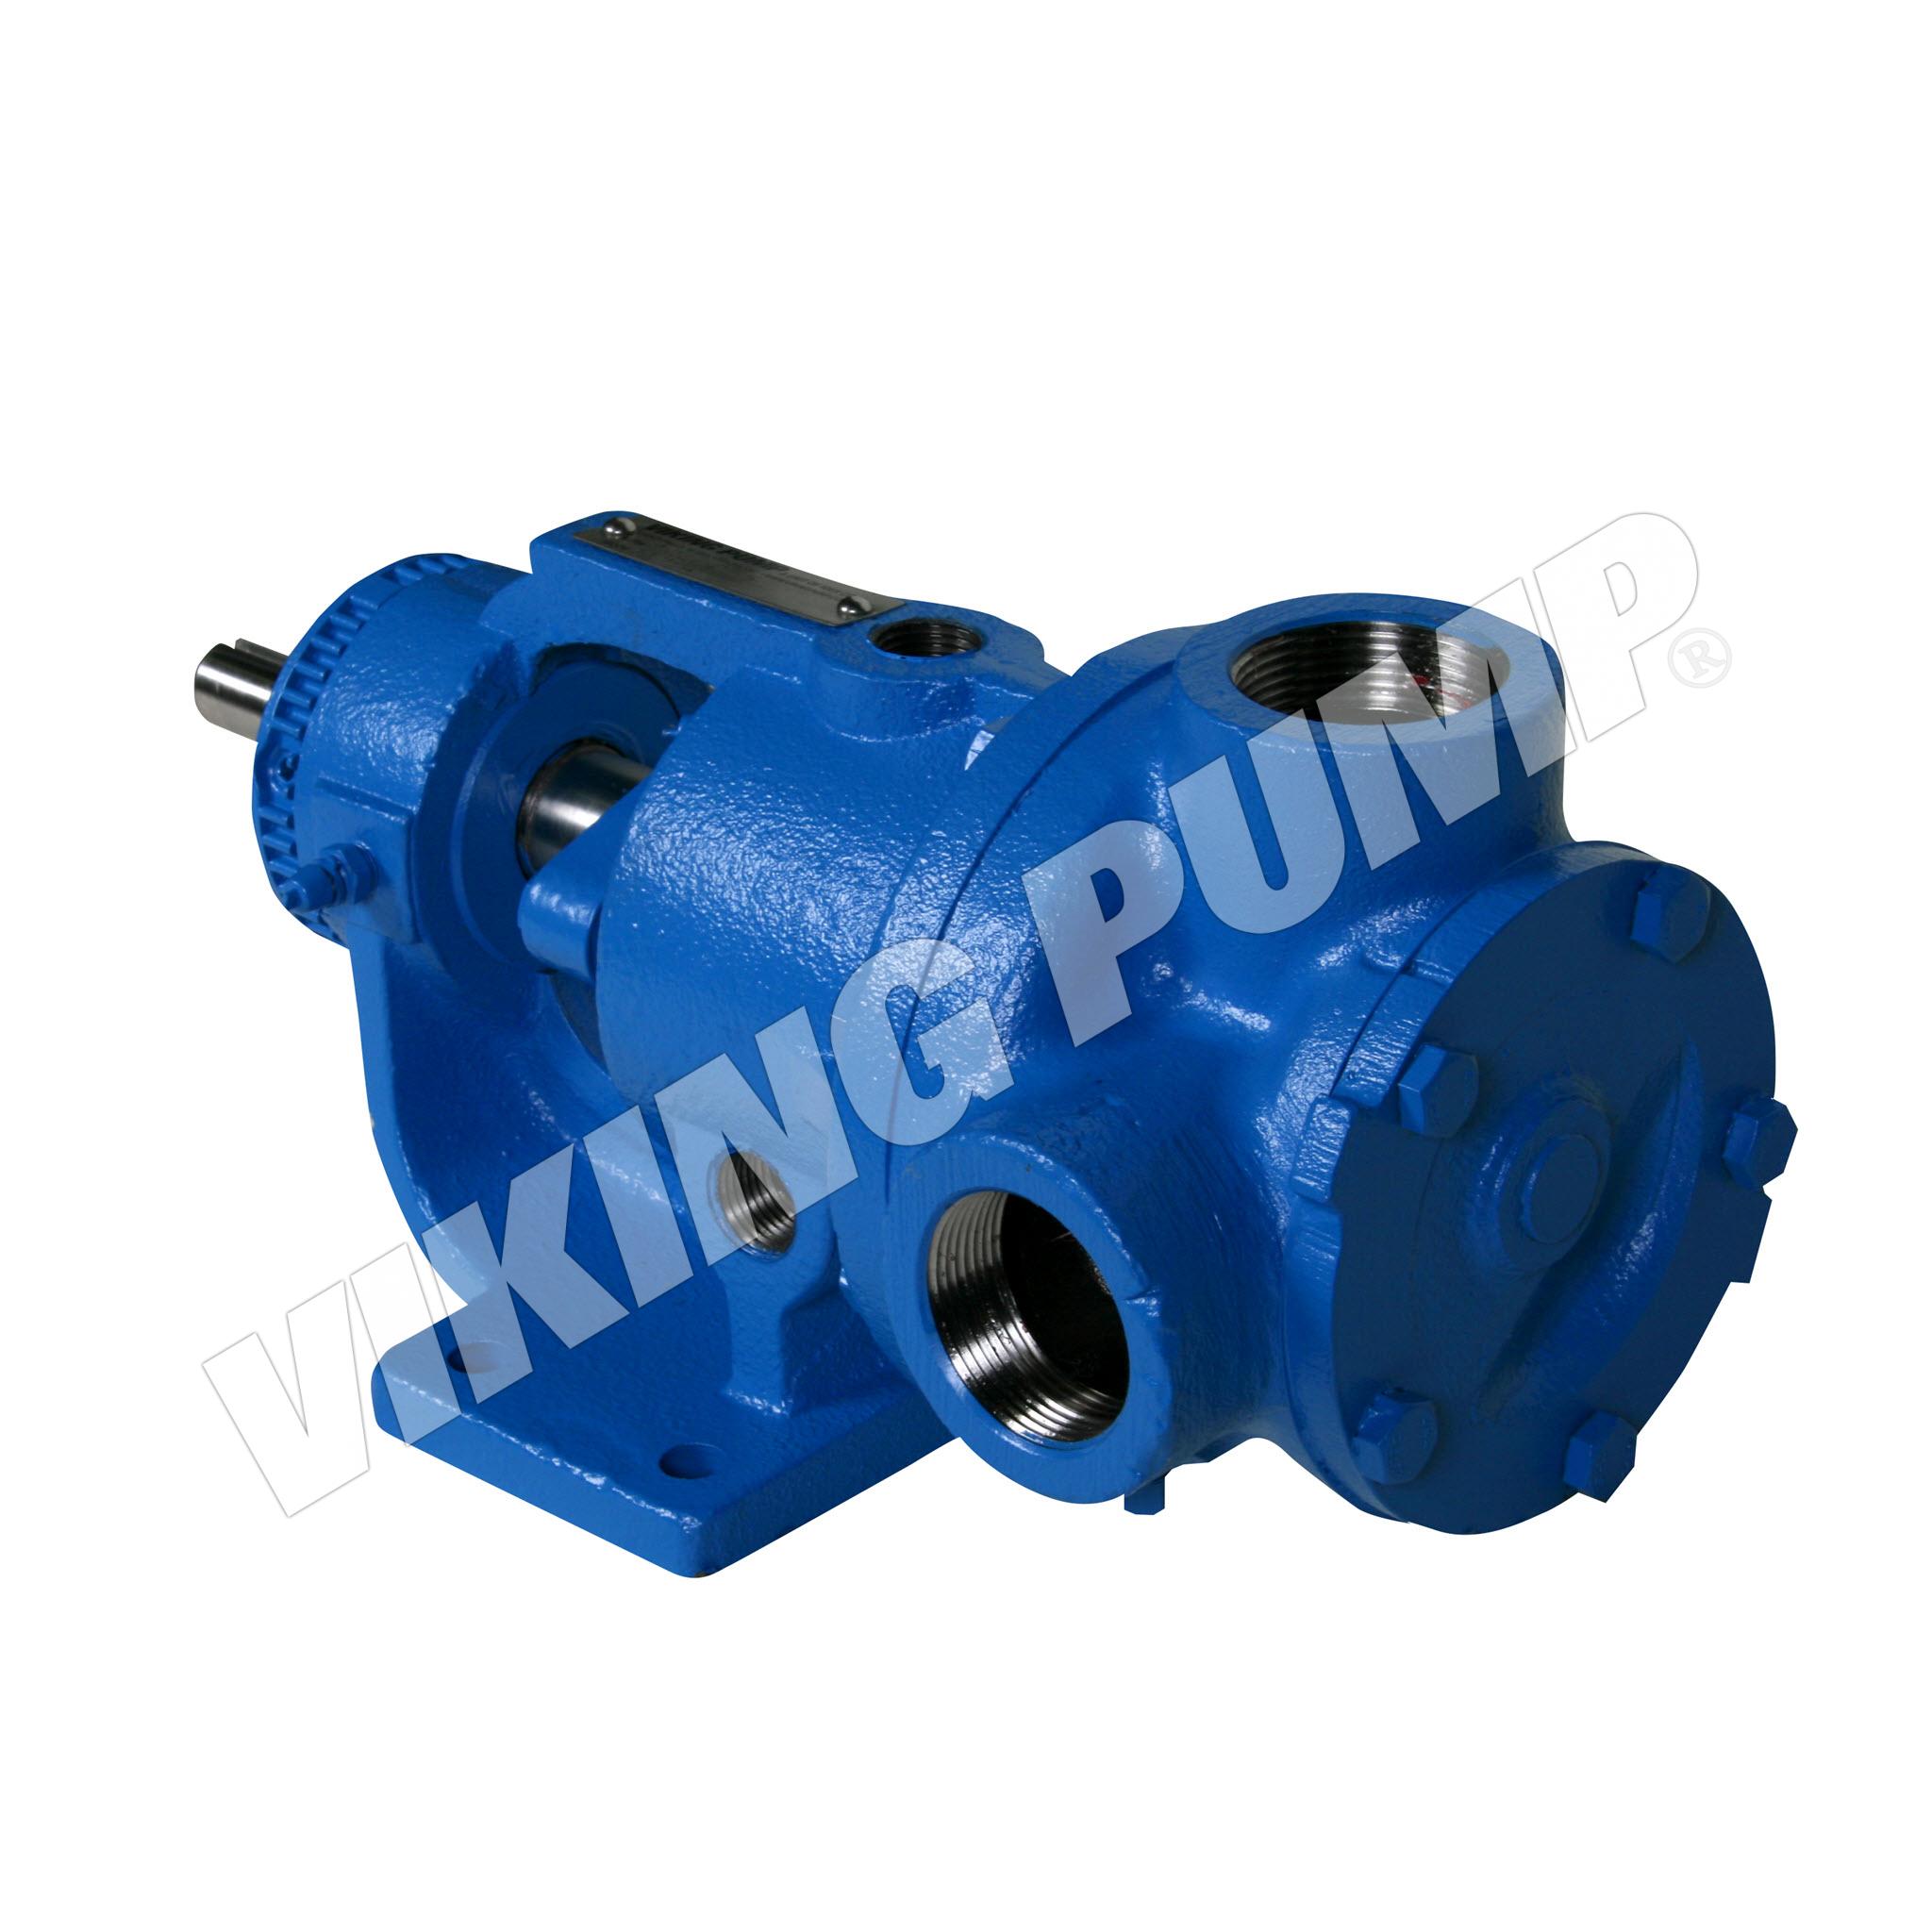 Model HL724, Foot Mounted, Packed Gland, less Relief Valve Pump